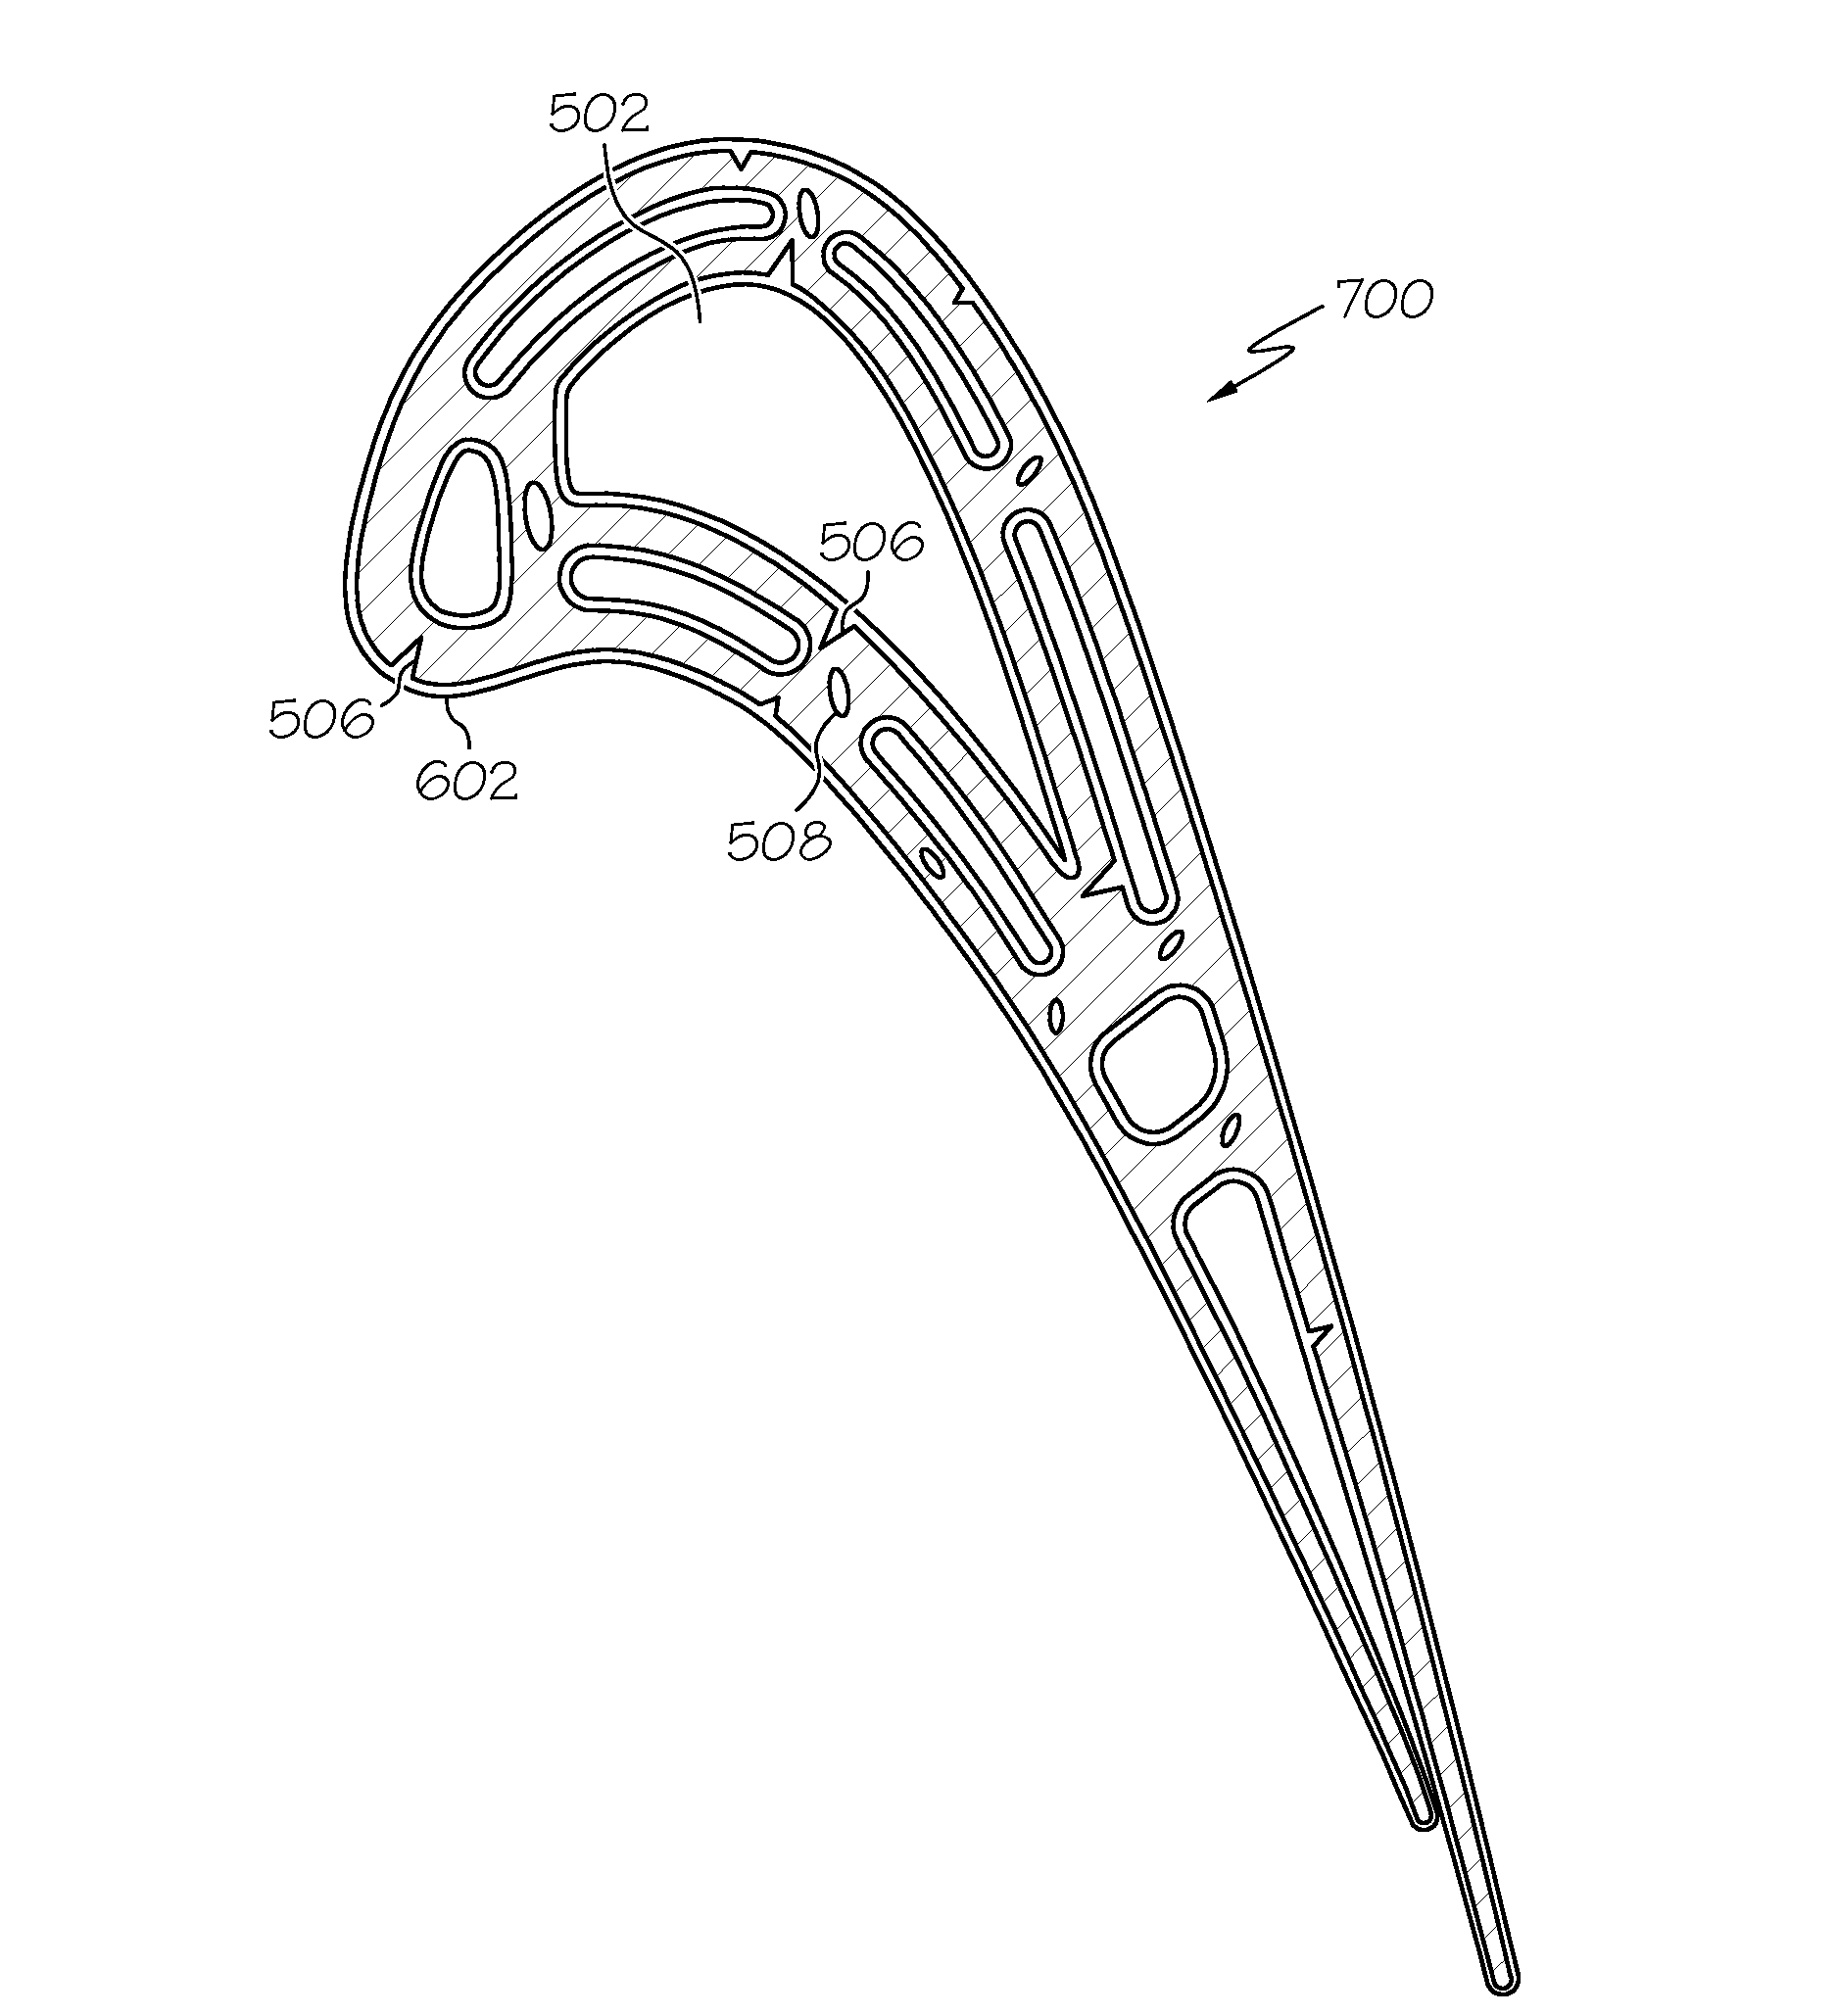 Methods for manufacturing components from articles formed by additive-manufacturing processes